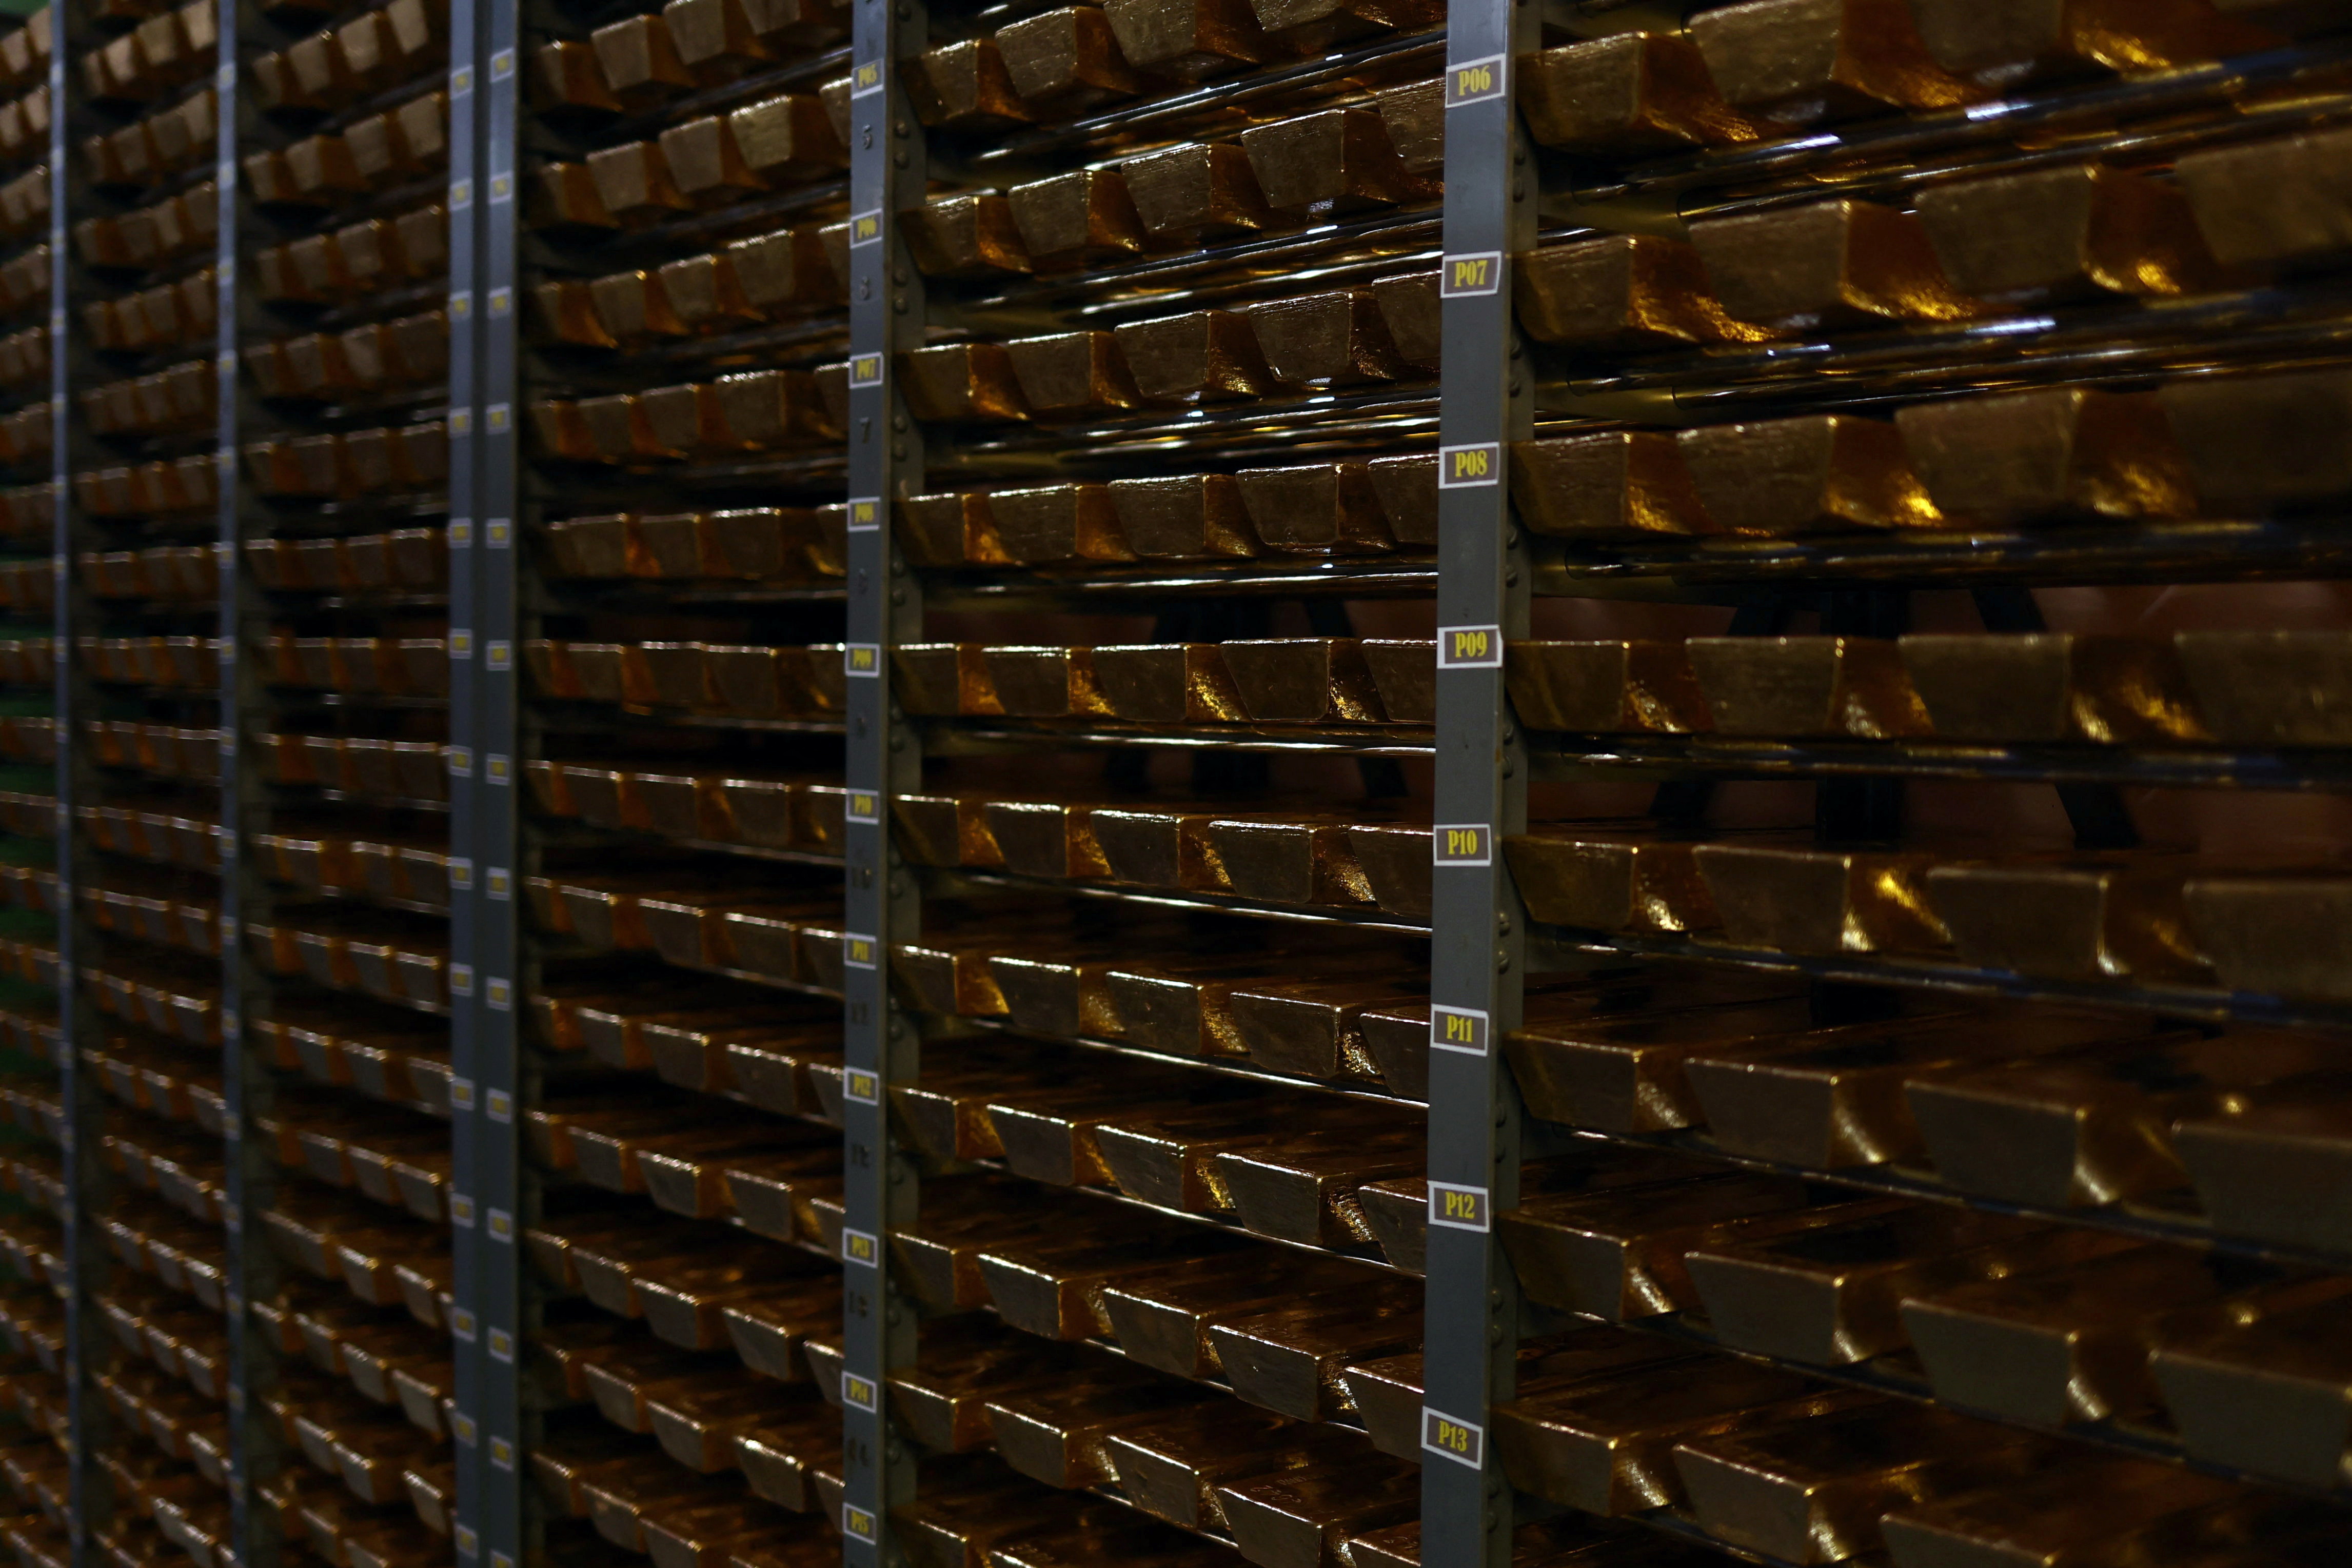 Part of Portugal's reserve gold bars are seen at the Bank of Portugal fortified complex in Carregado, Alenquer